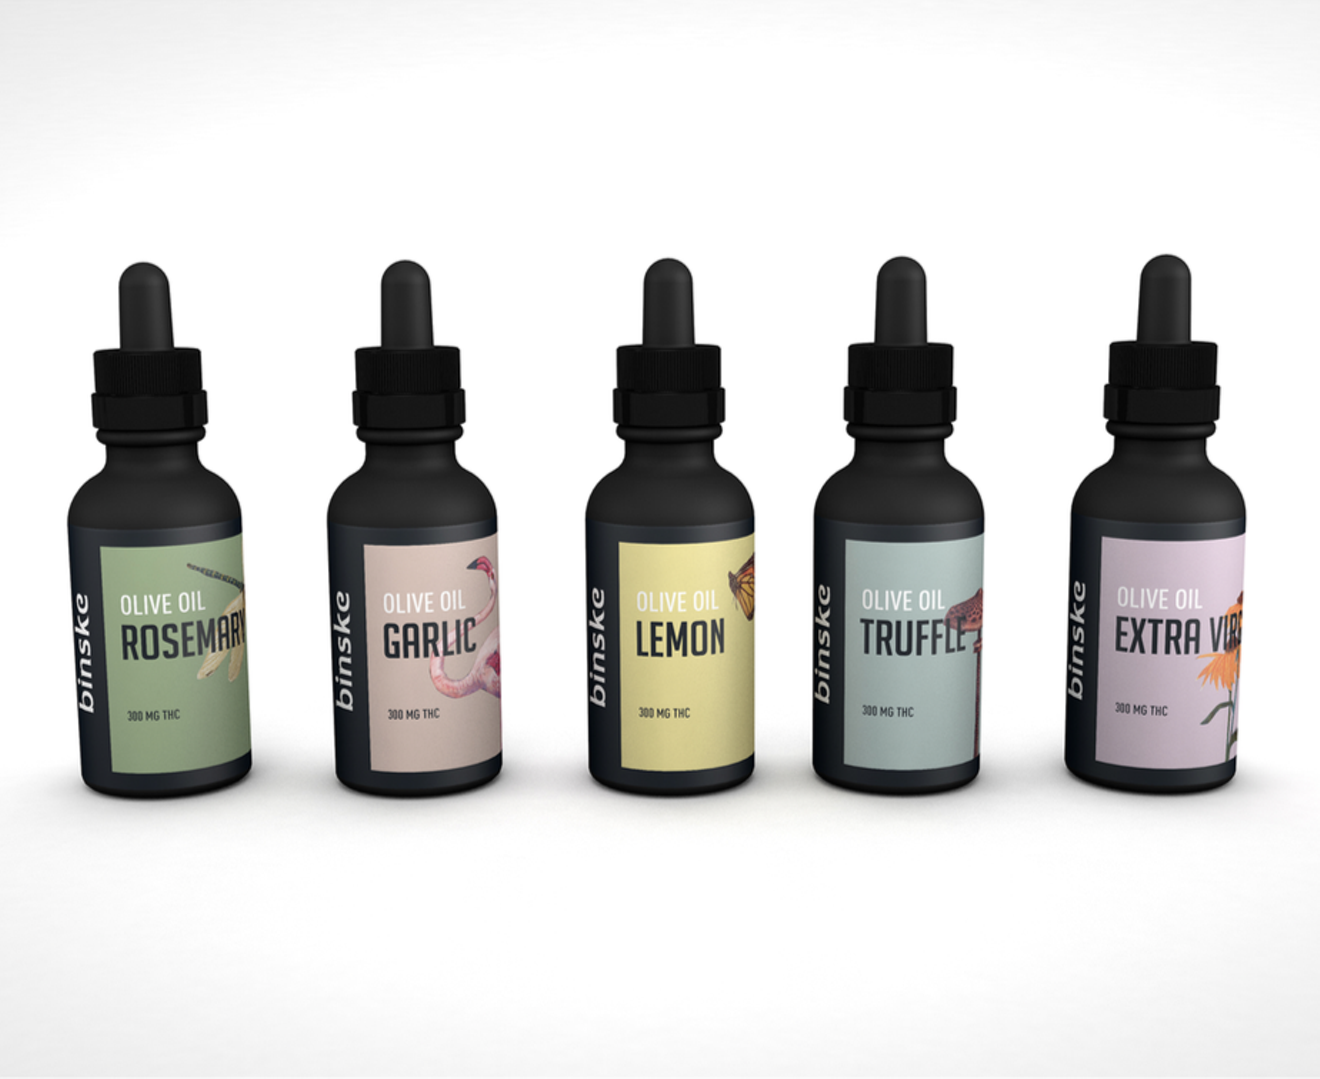 Flavored tinctures are a sort of loophole in Florida law, which prohibits edibles.